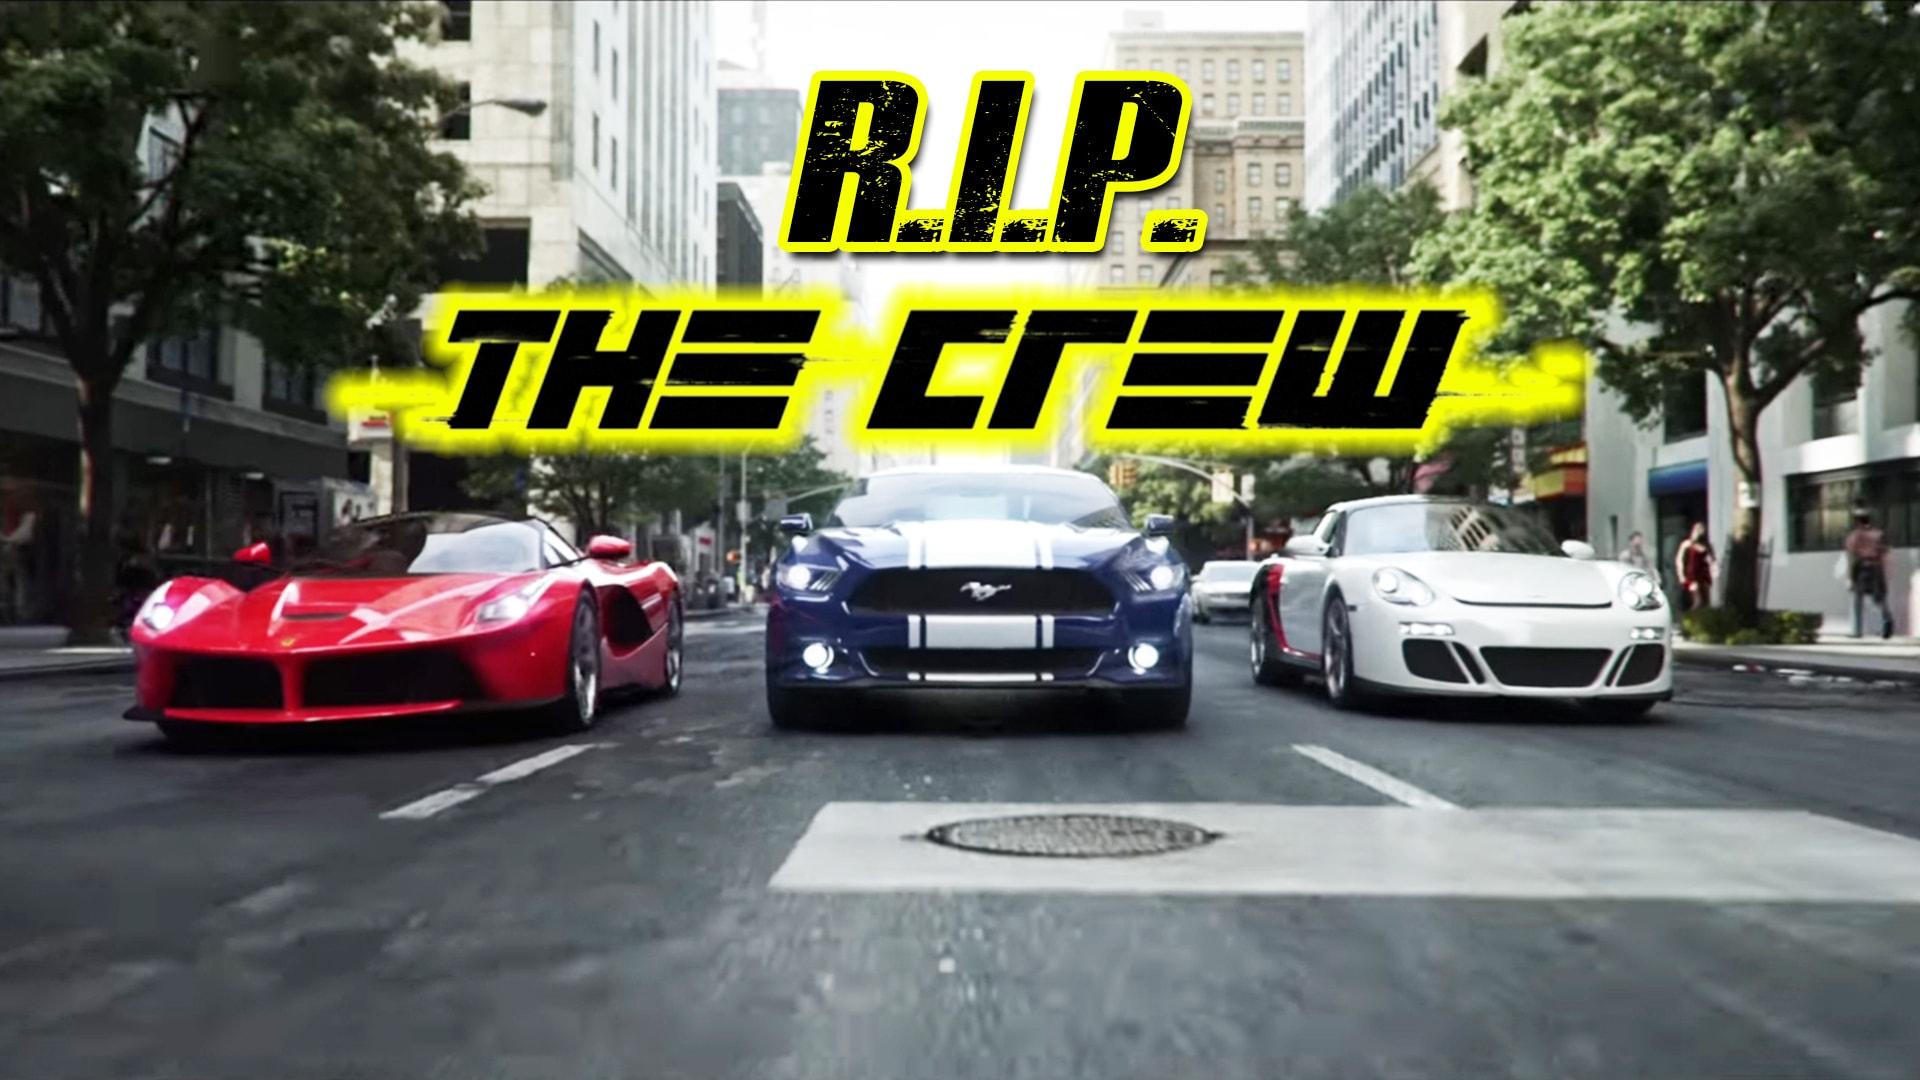 Rent The Crew Motorfest on PlayStation 5